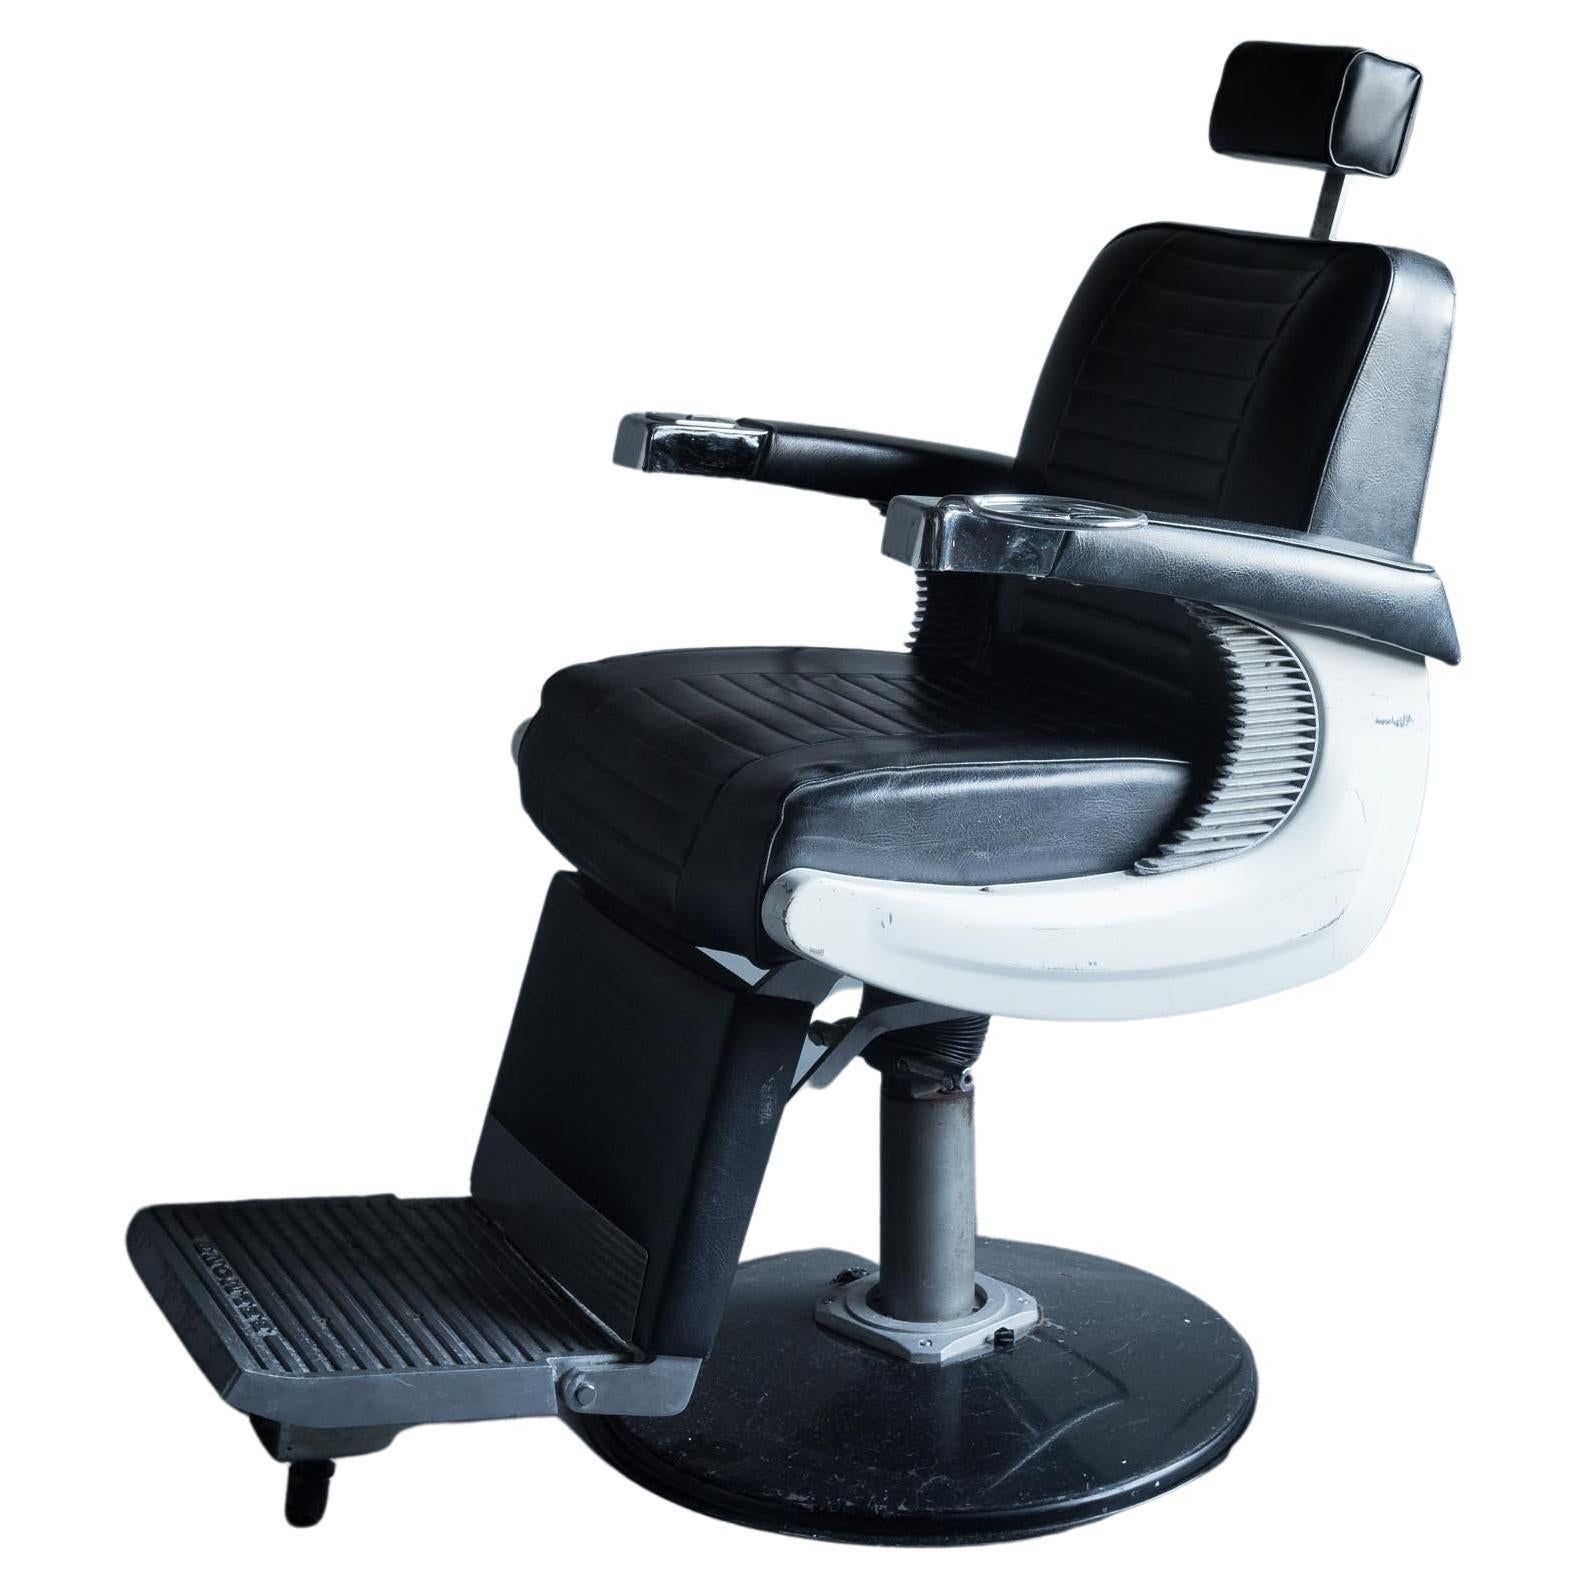 Four separate 1960's Original Belmont Barber Chair For Sale